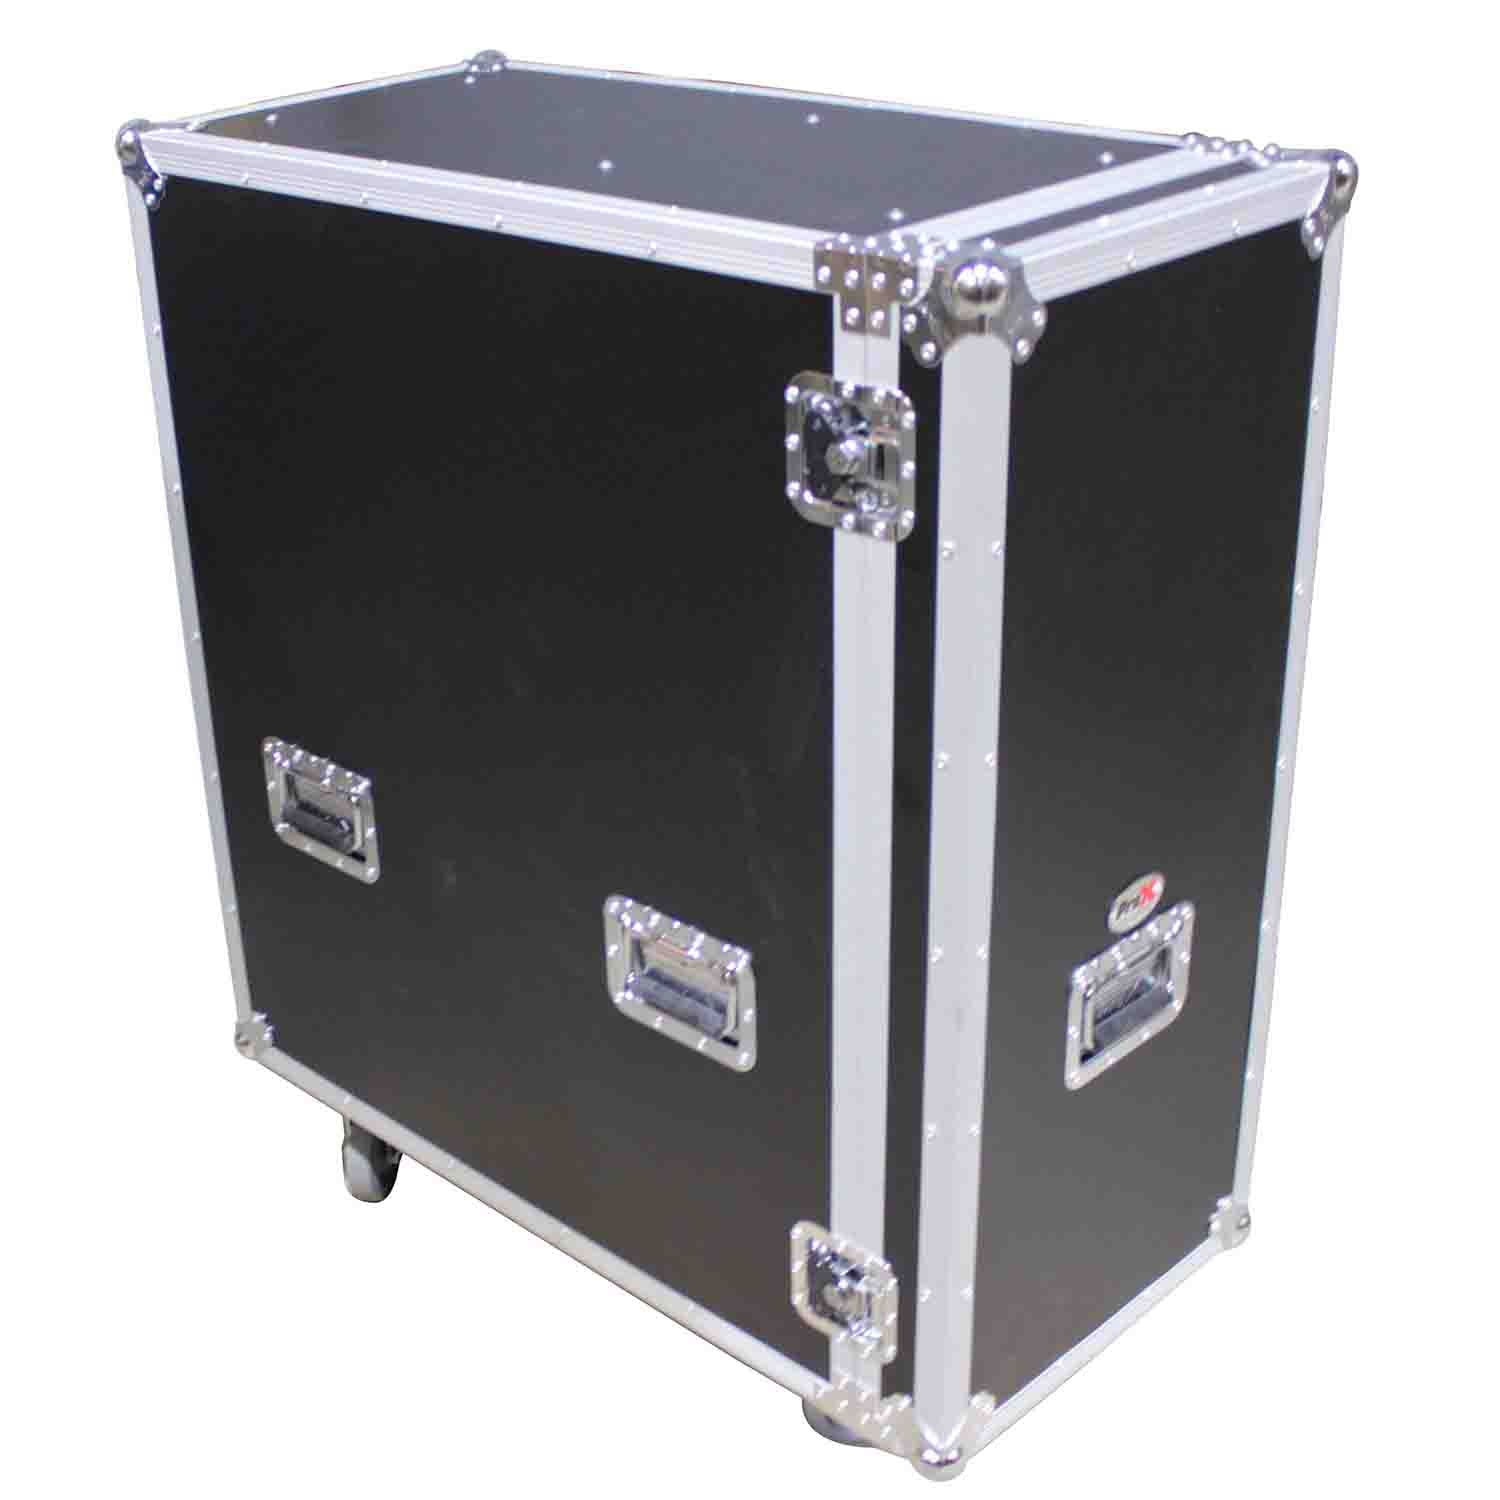 ProX XS-6XBP3636 Flight-Road Case For 6 Pieces ProX Aluminum Base Plate - 36" x 36" - Hollywood DJ